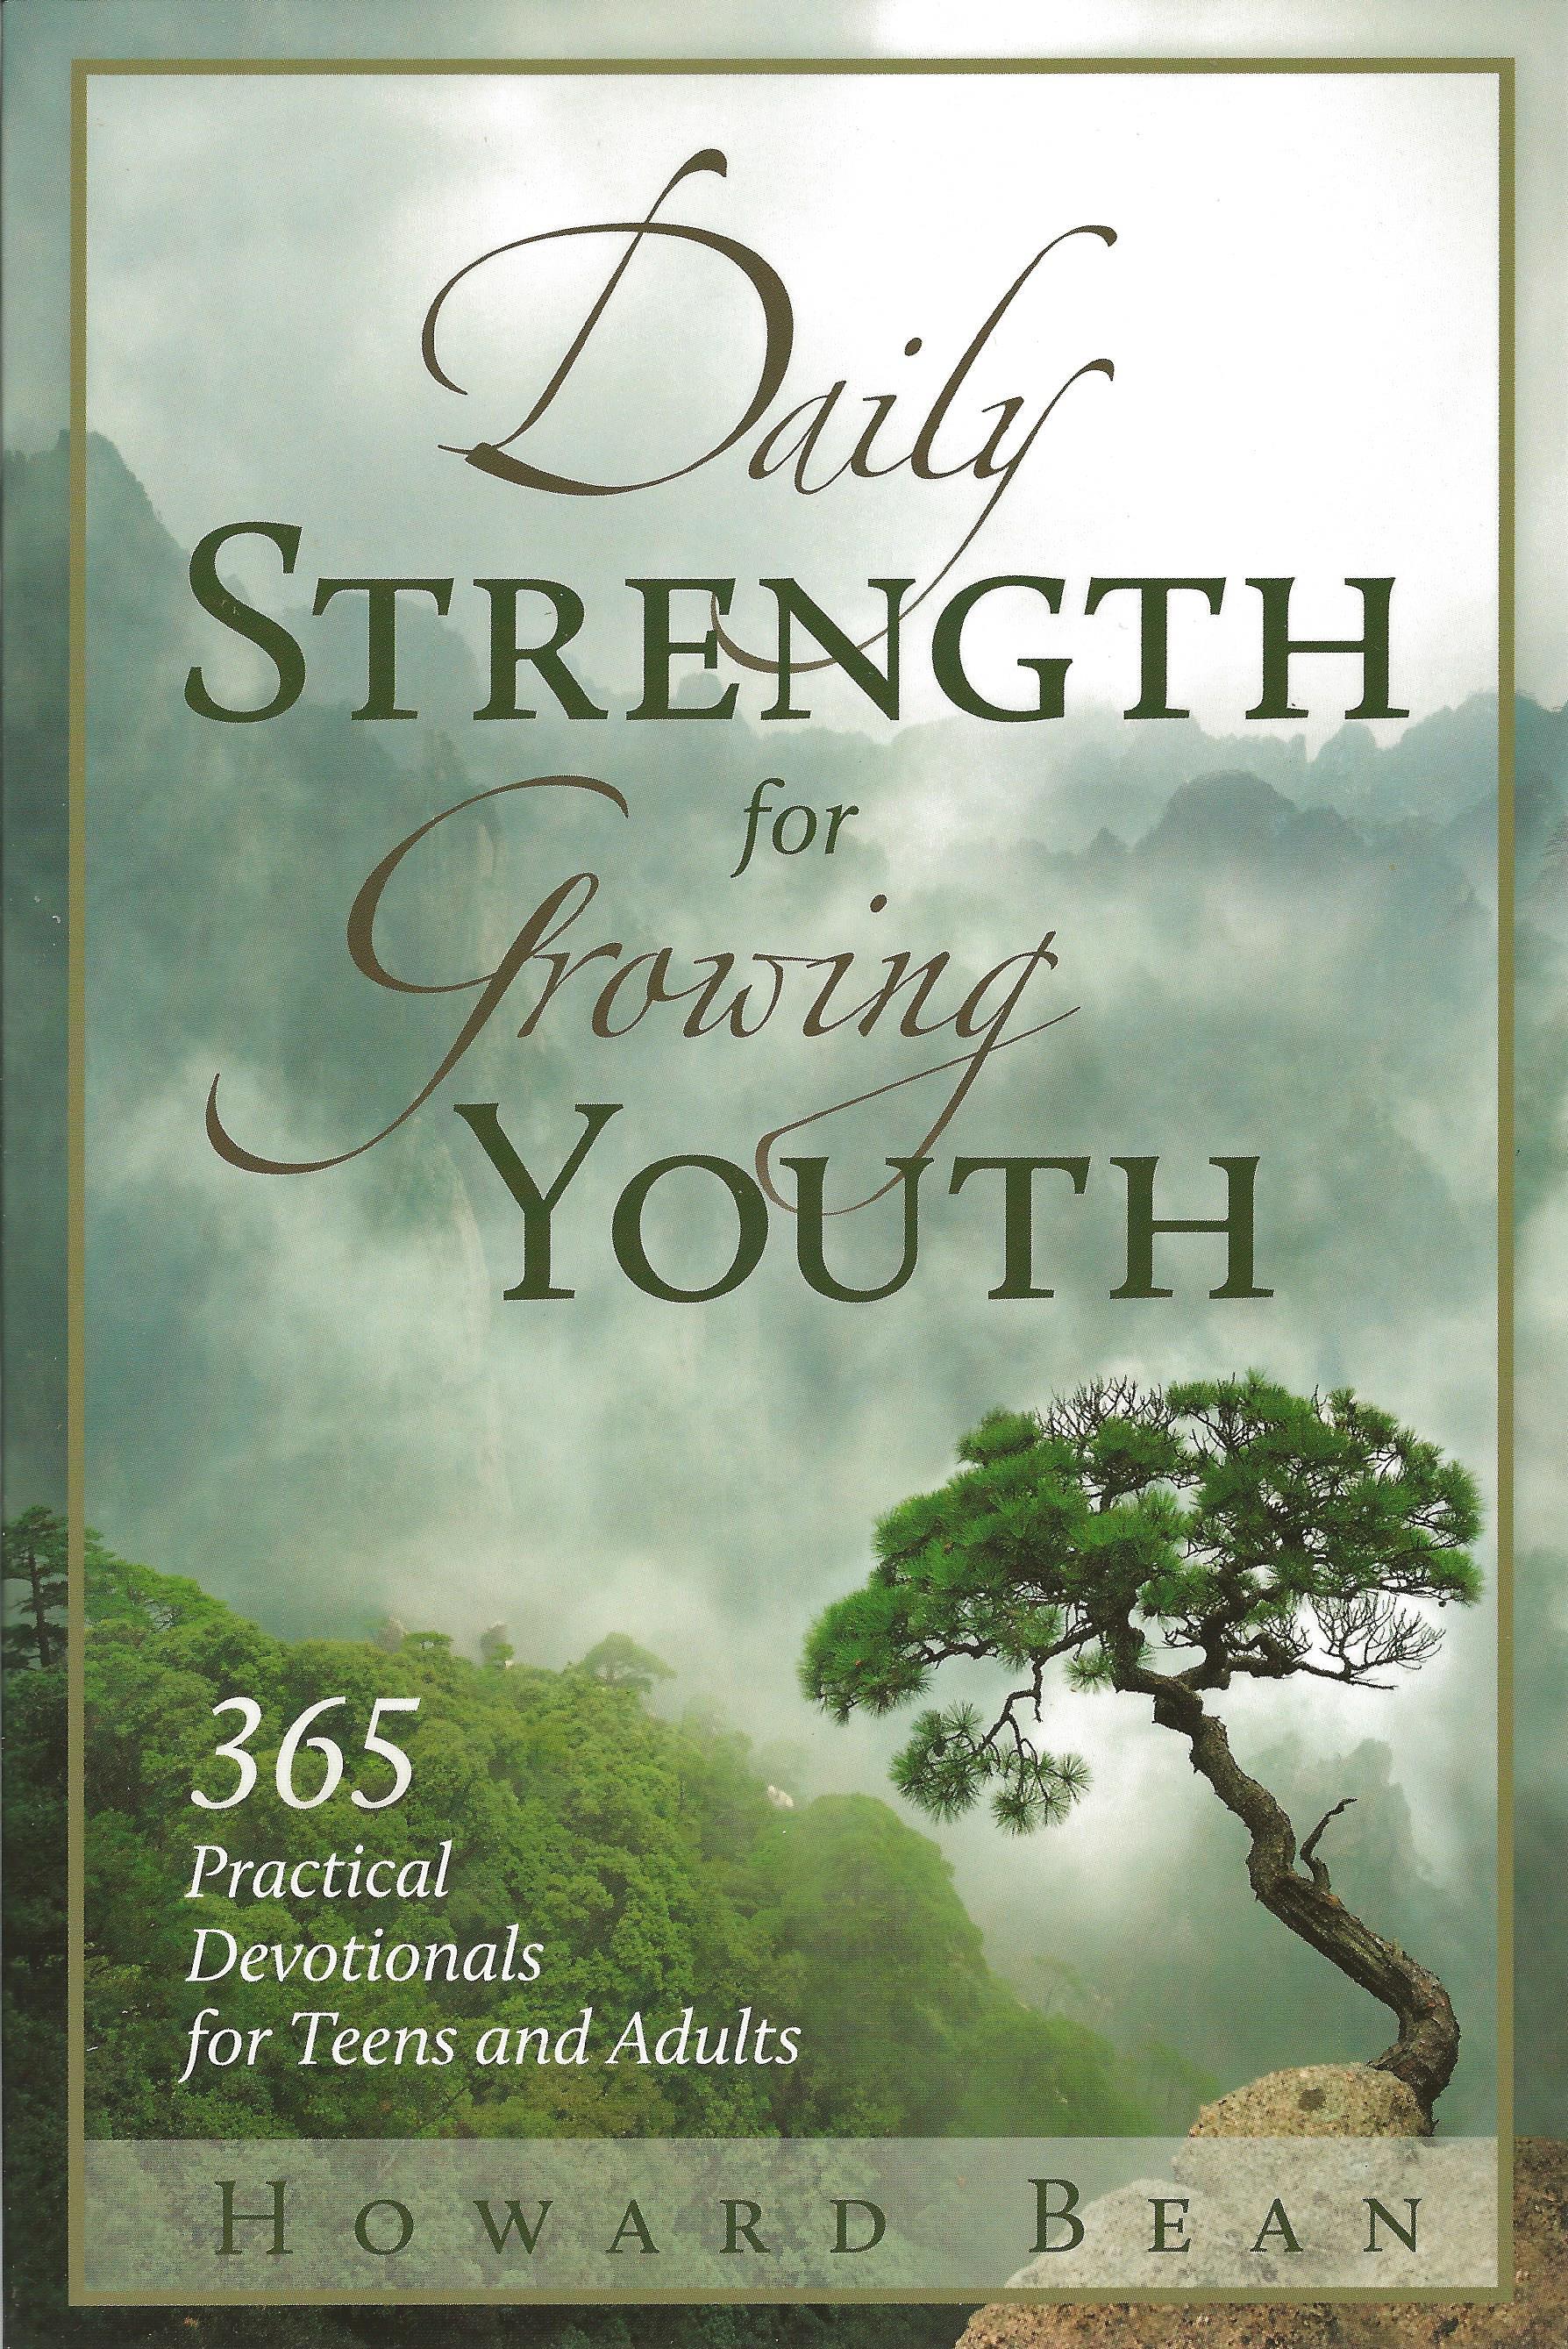 DAILY STRENGTH FOR GROWING YOUTH Howard Bean - Click Image to Close